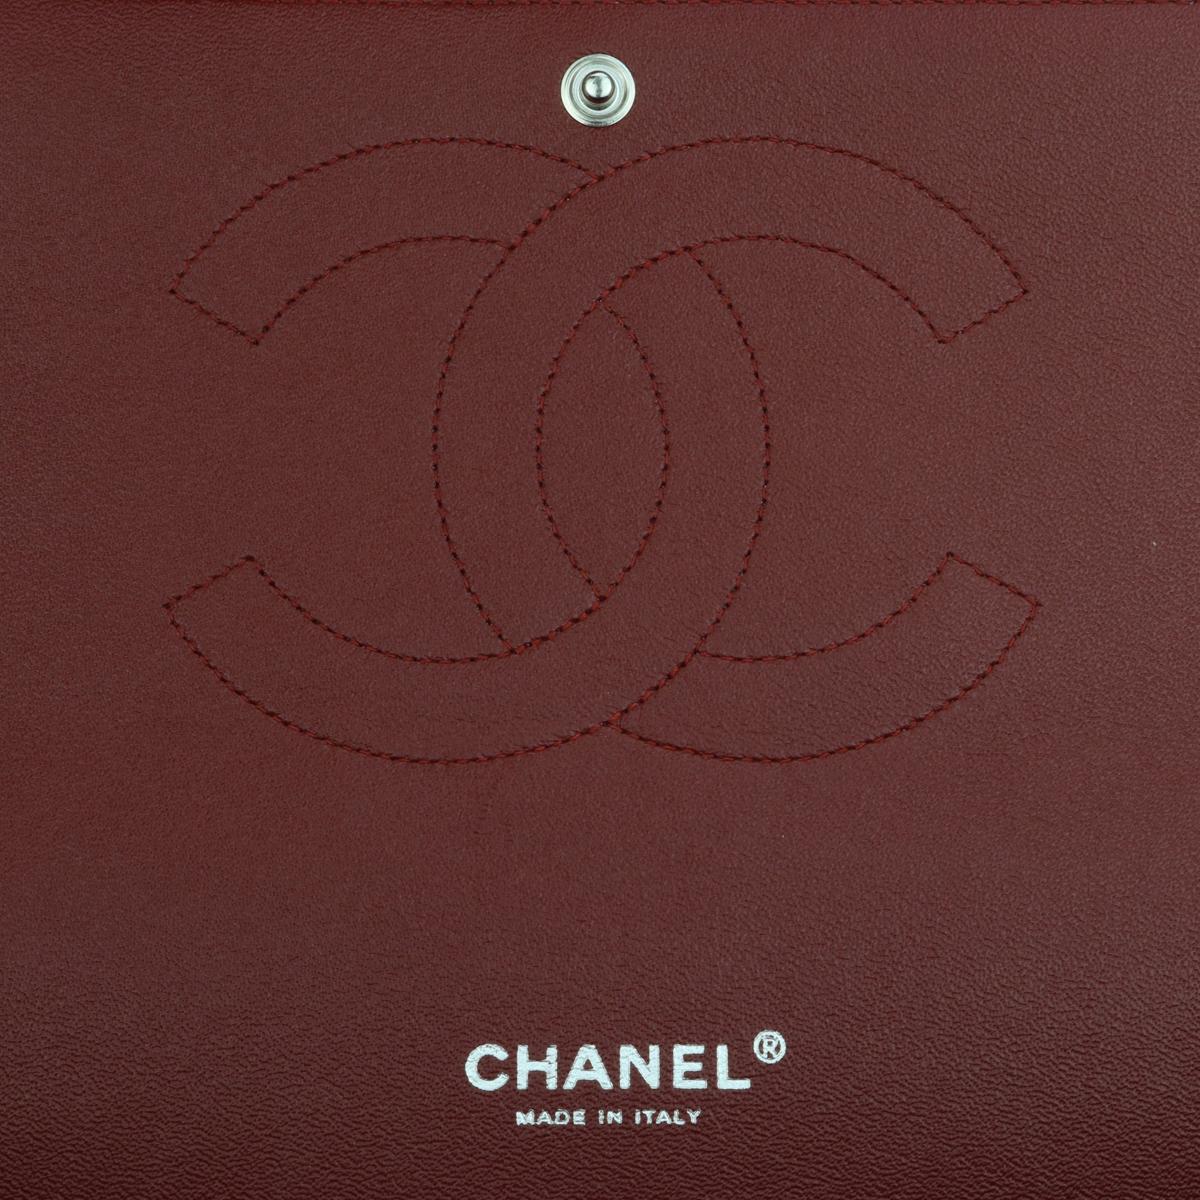 CHANEL Double Flap Maxi Bag Dark Red Burgundy Caviar with Silver Hardware 2011 9